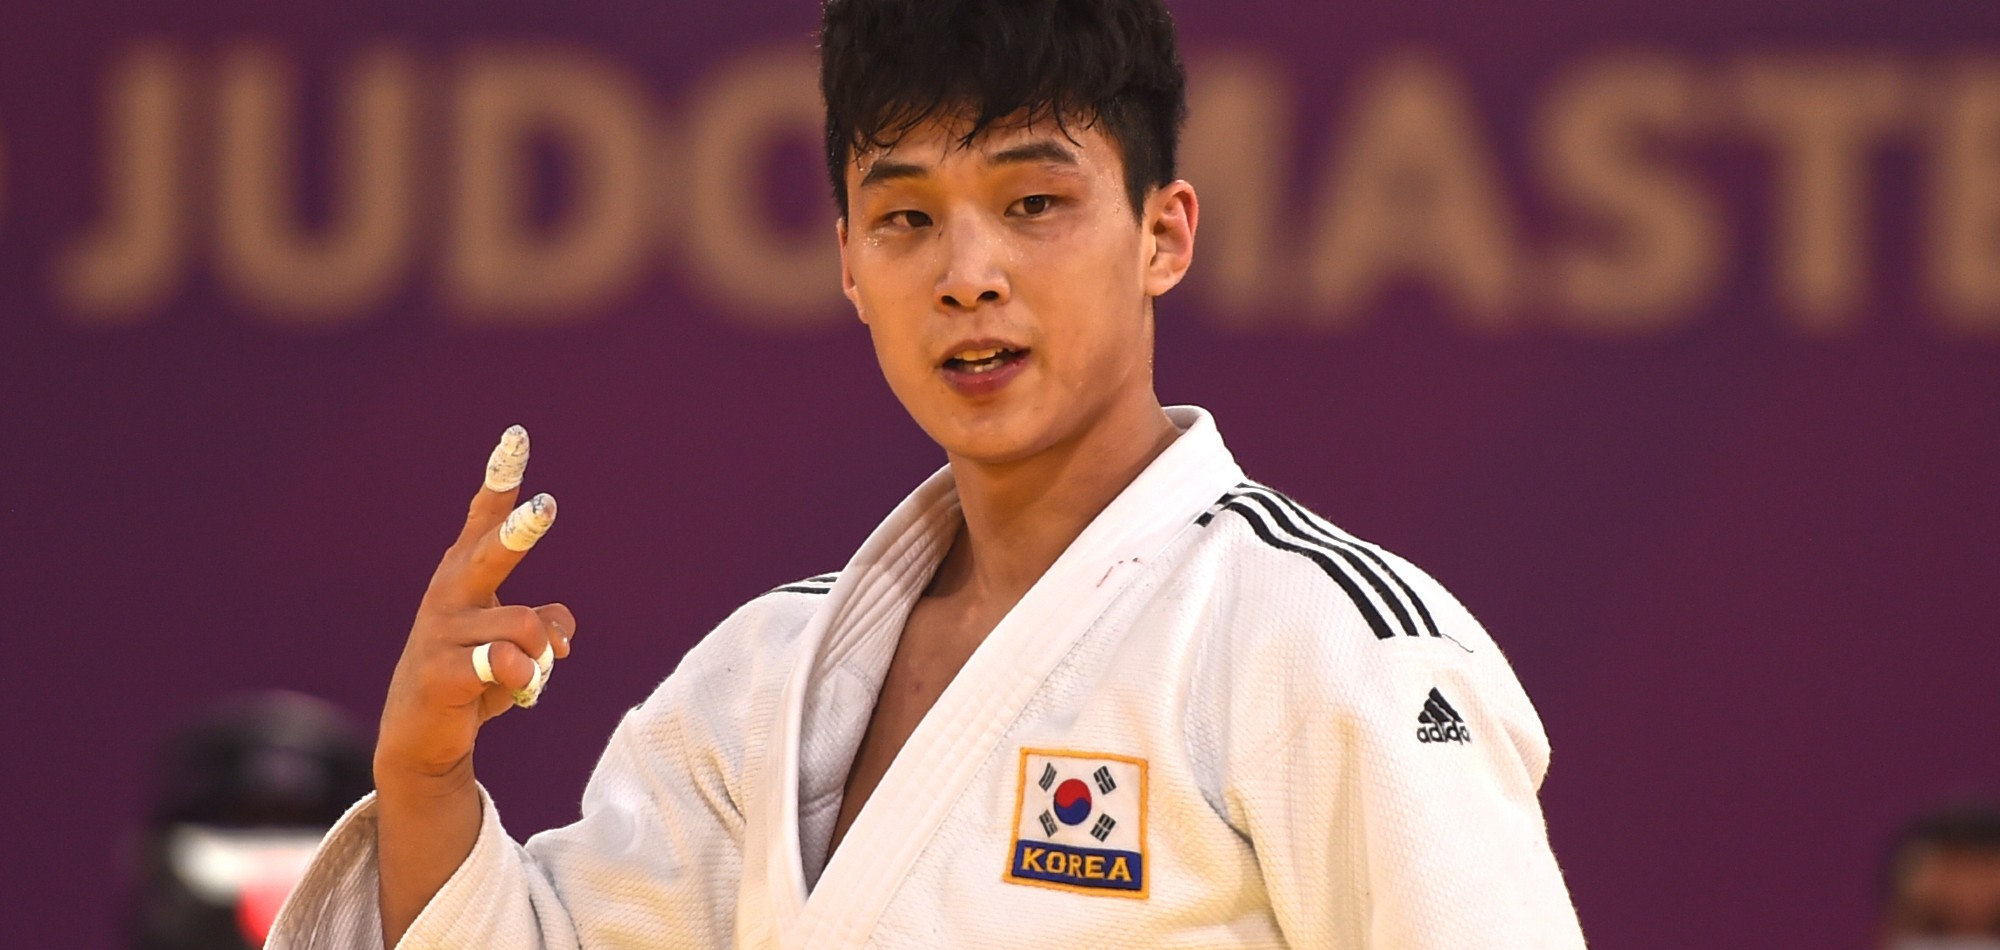 Korea snatched 2 gold medals in the opening of the 2021 Doha World Judo Masters season